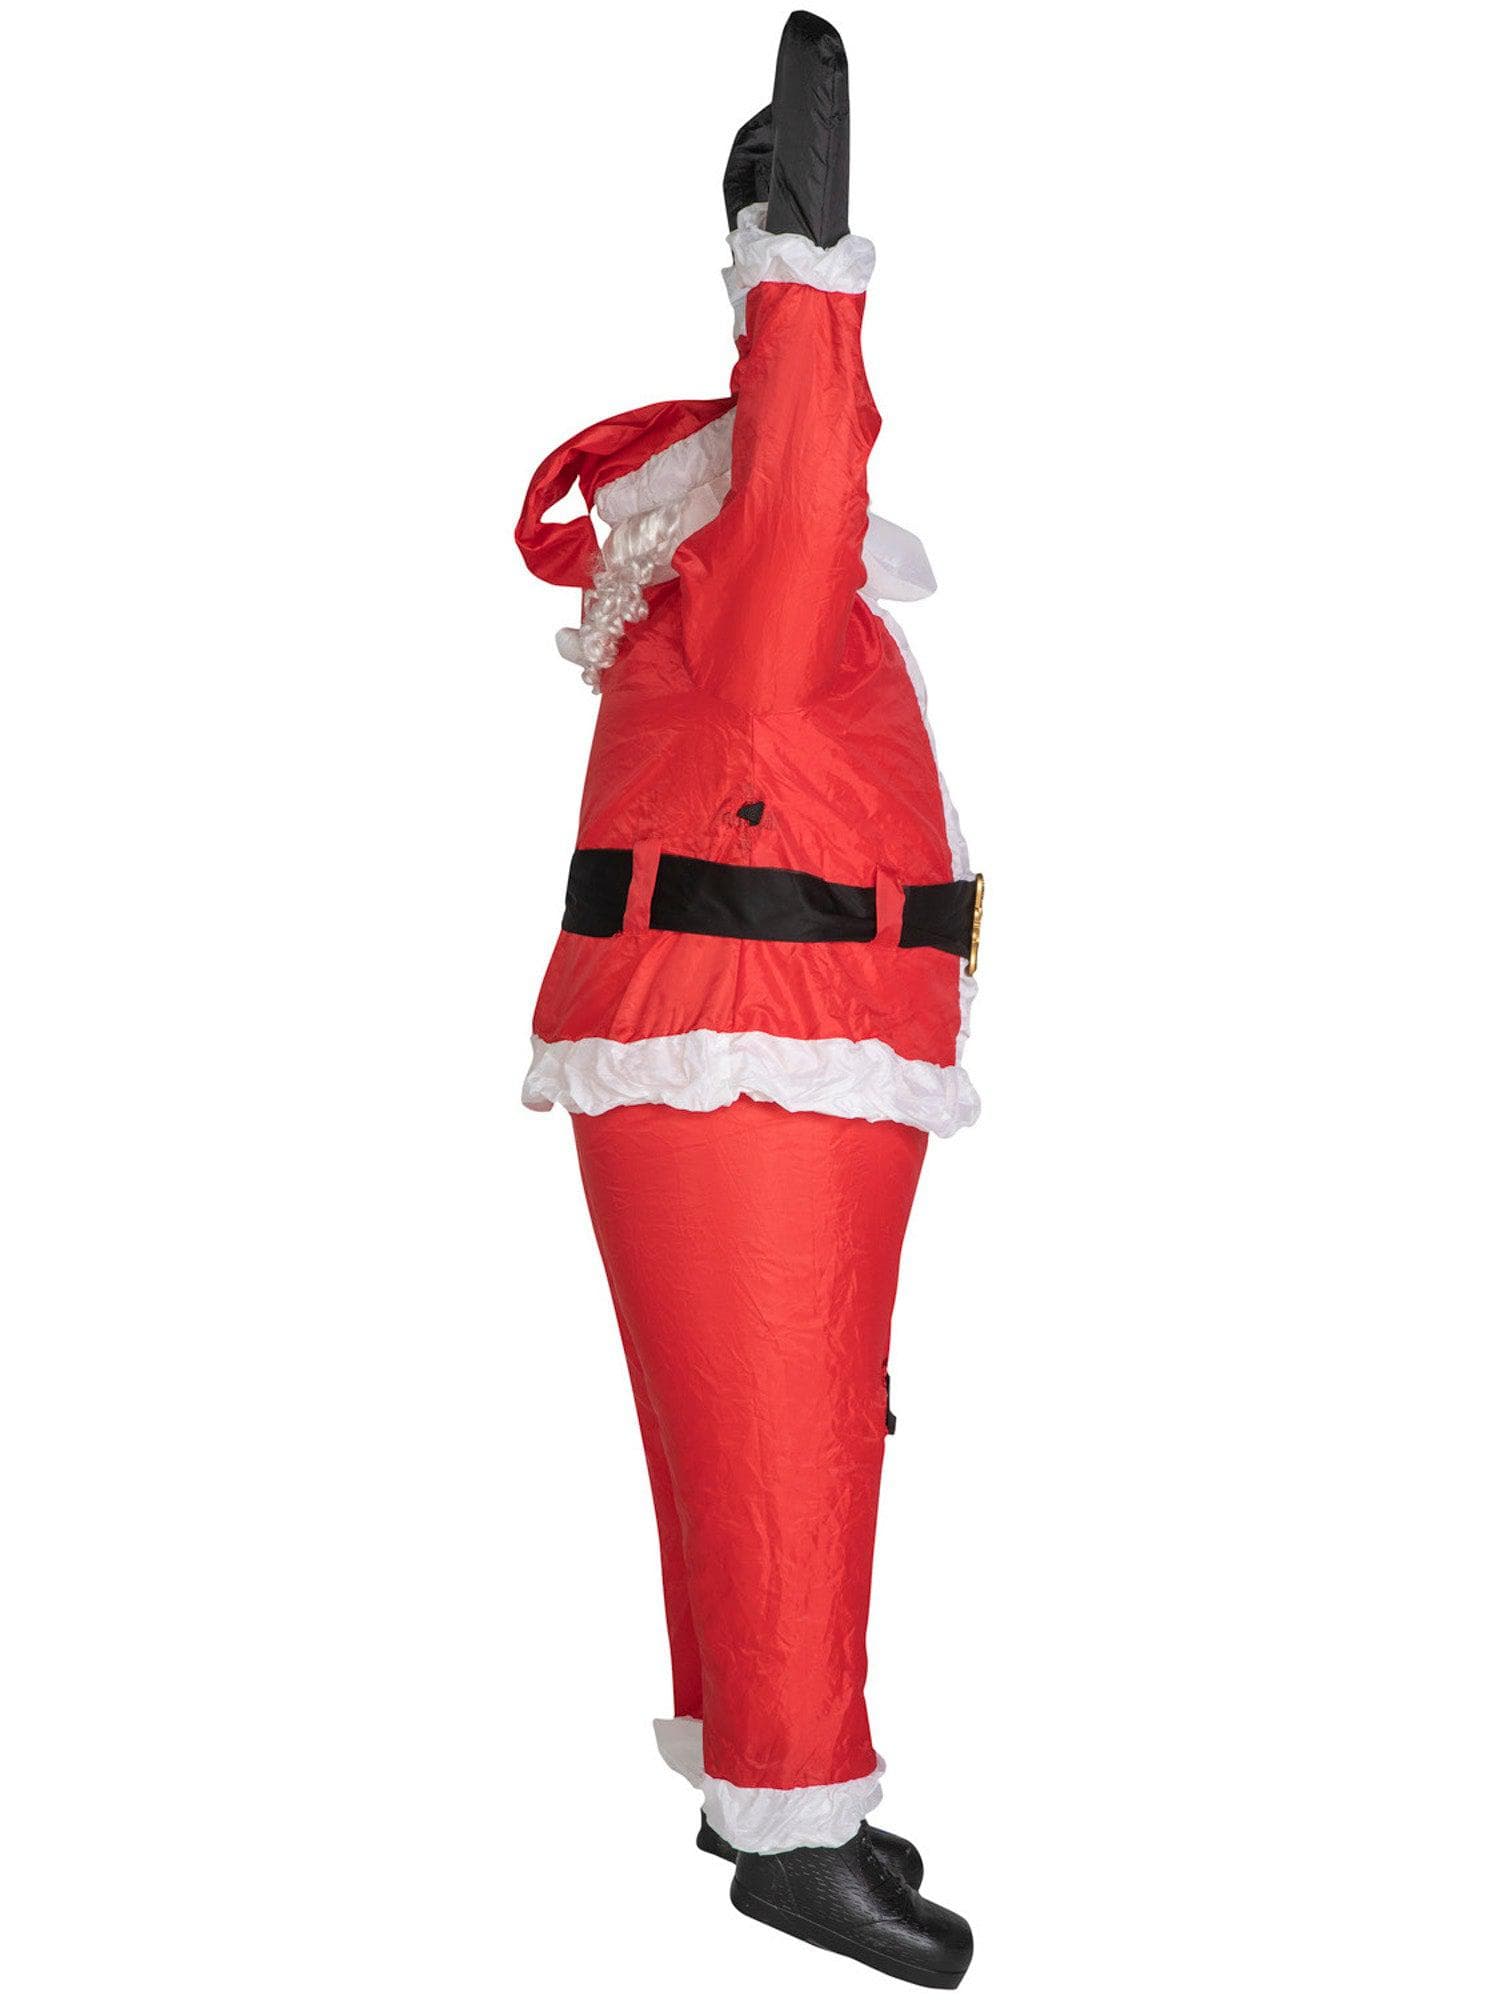 6.5 Foot Santa Hanging From Roof Light Up Christmas Inflatable Lawn Decor - costumes.com